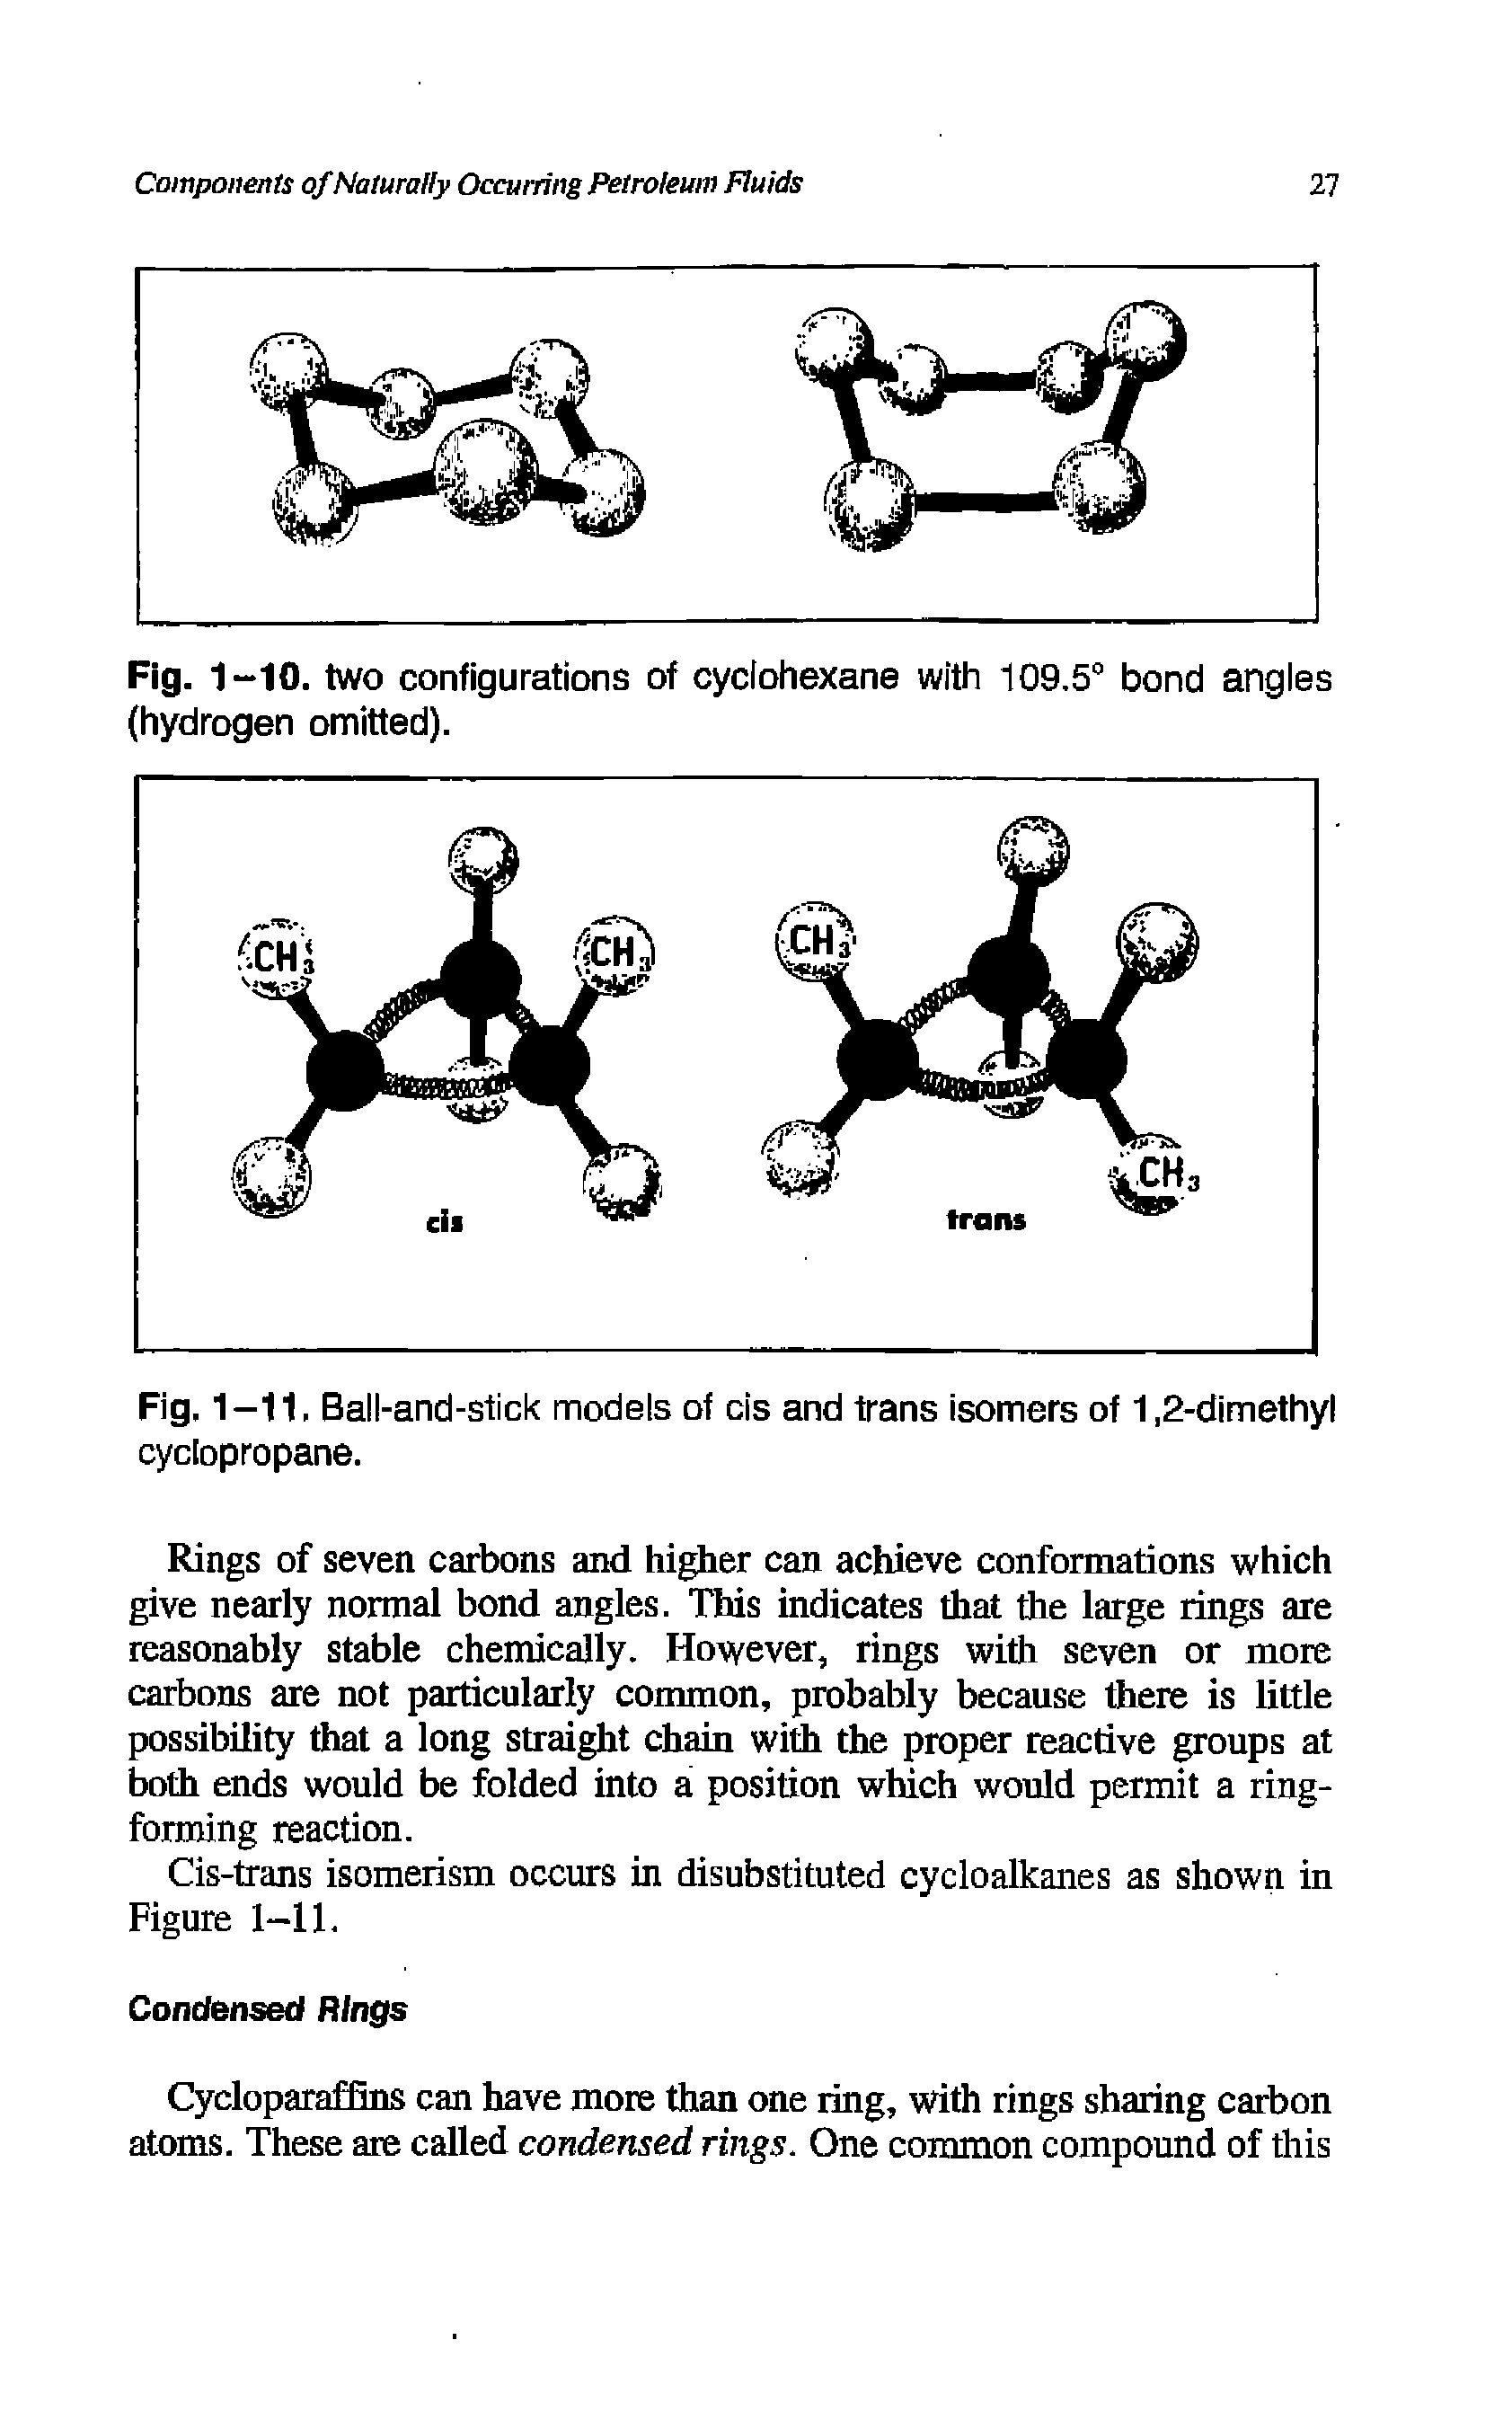 Fig. 1-11. Ball-and-stick models of cis and trans isomers of 1,2-dimethyl cyclopropane.